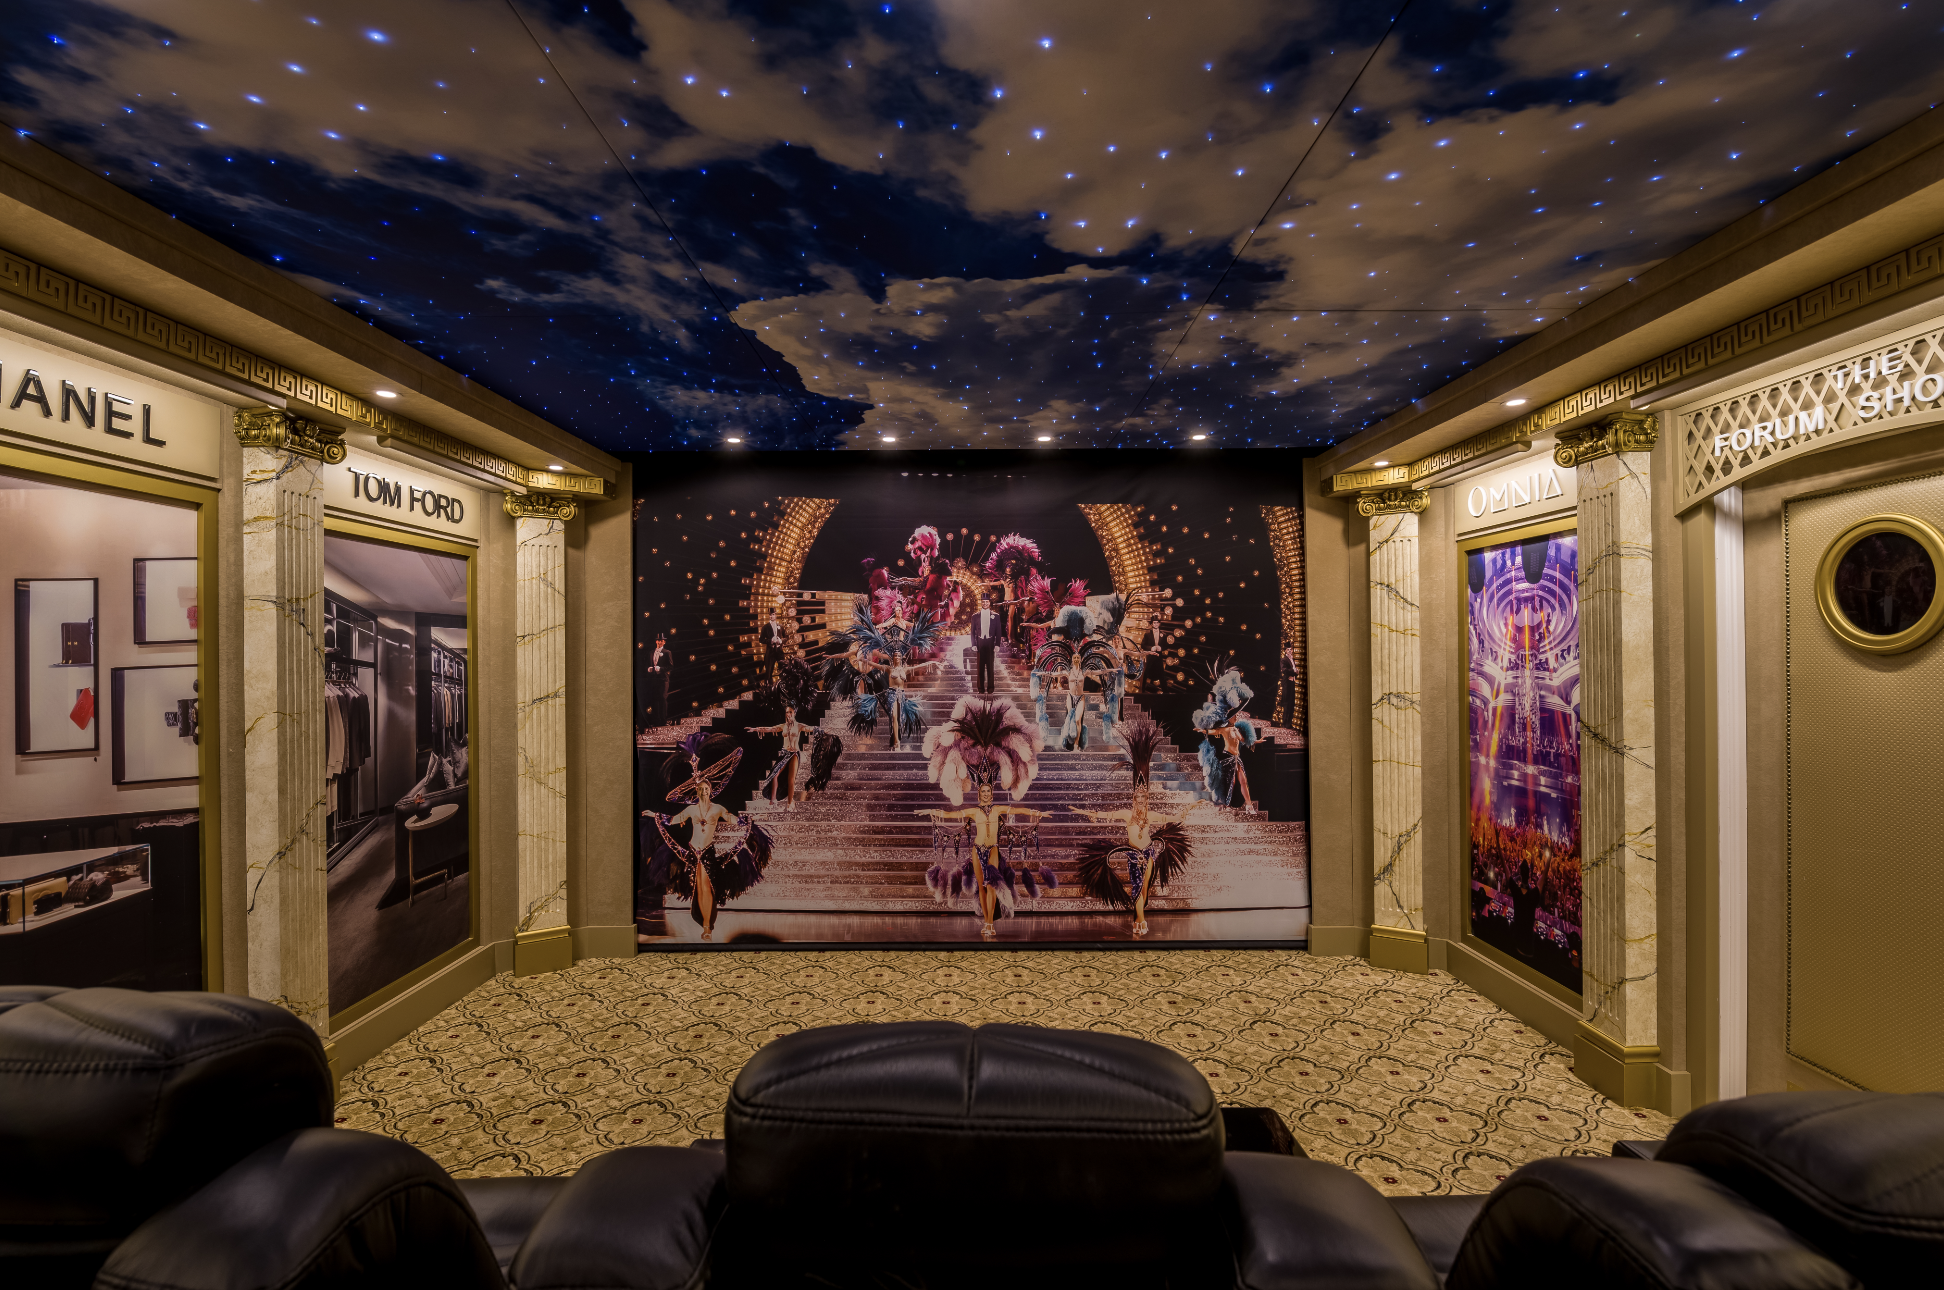 Las Vegas Theme Home Theater by Digital Installers South Bay 1 Movie Screen